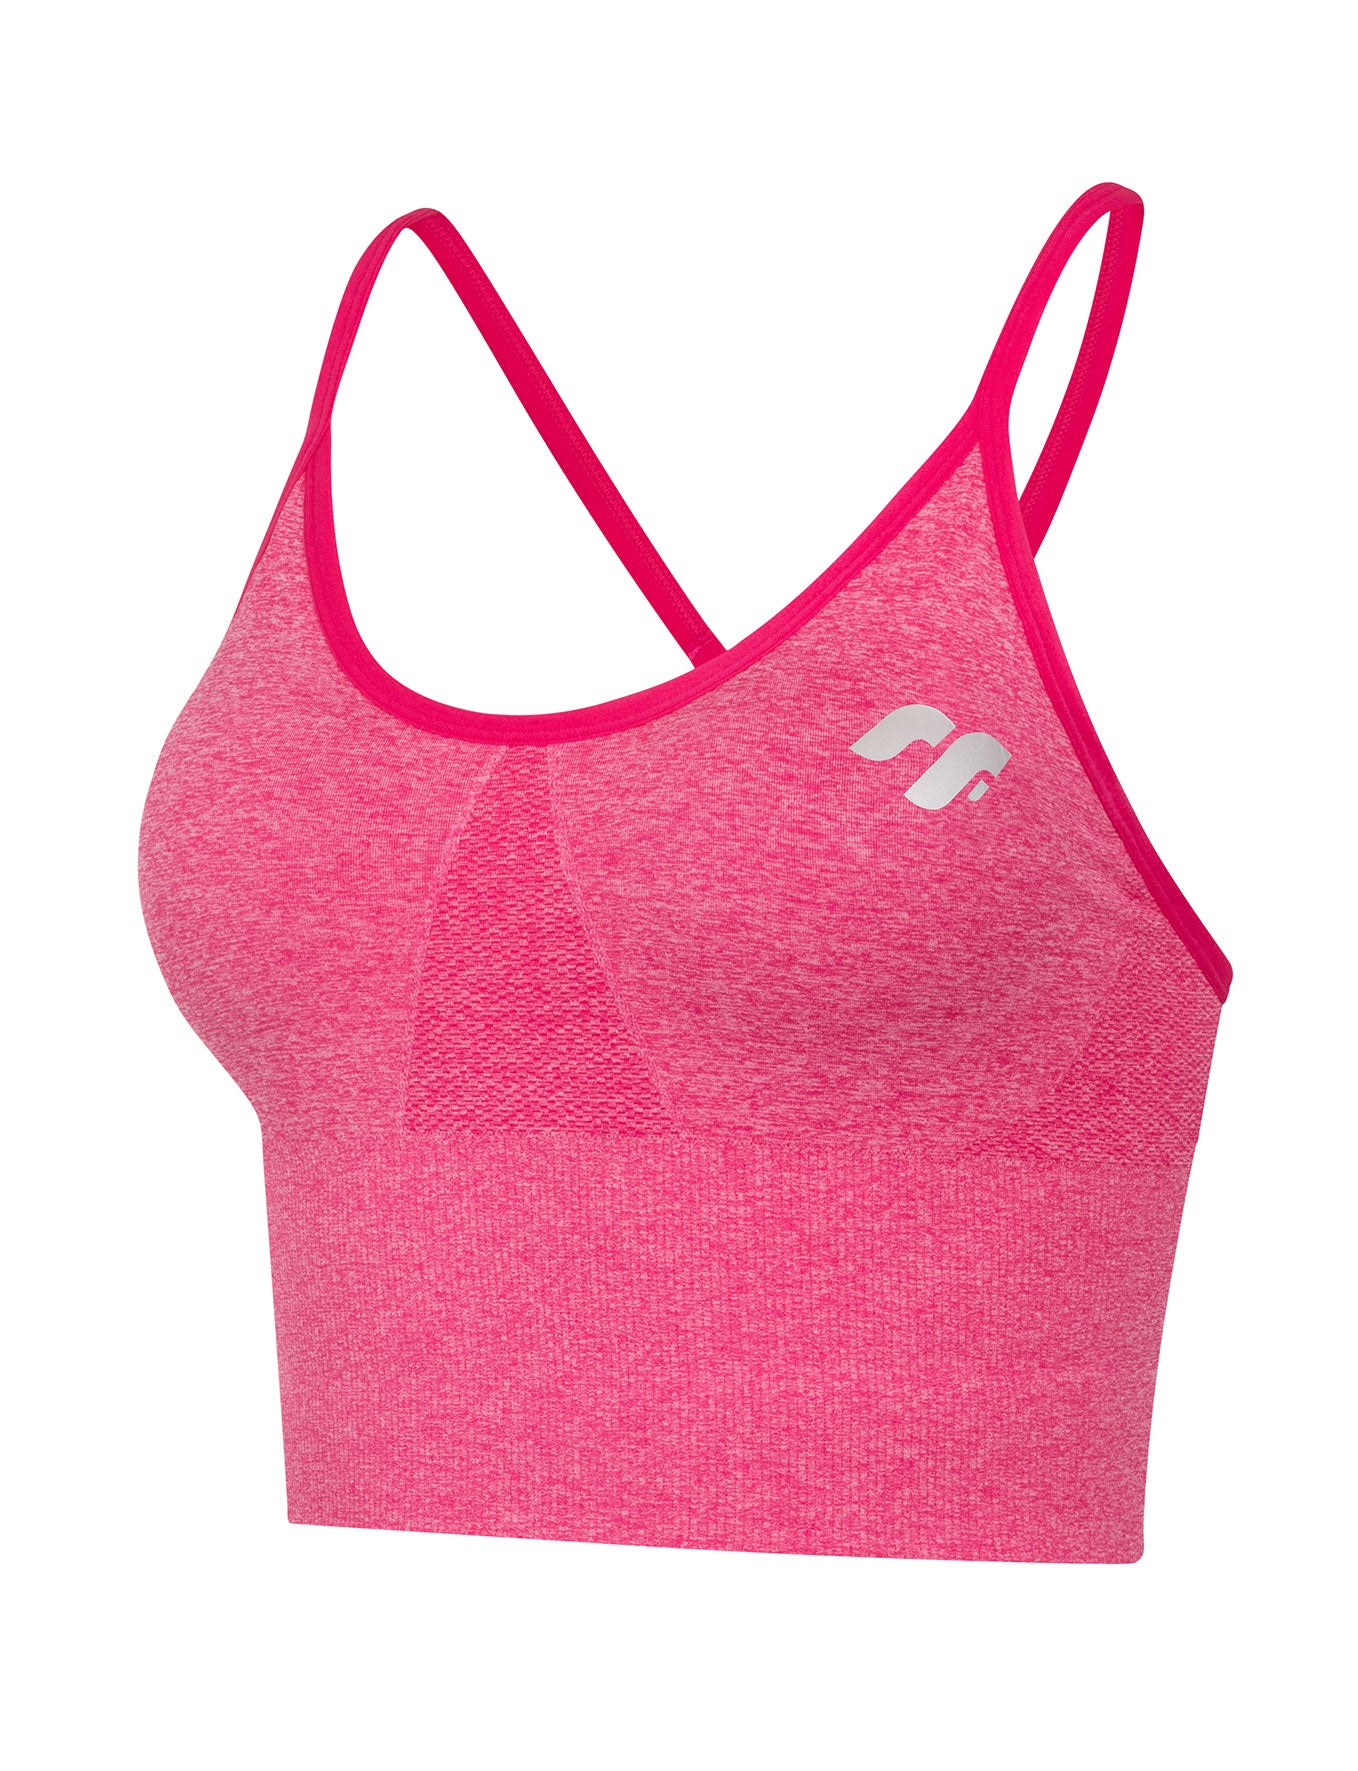 Women Bra Tank Top Ribbed Athletic Tight Back Quick-Drying Sports Bra ，  Crop Top Tight Yoga Vest Fitness Clothe (Color : Pink, Size : Medium)